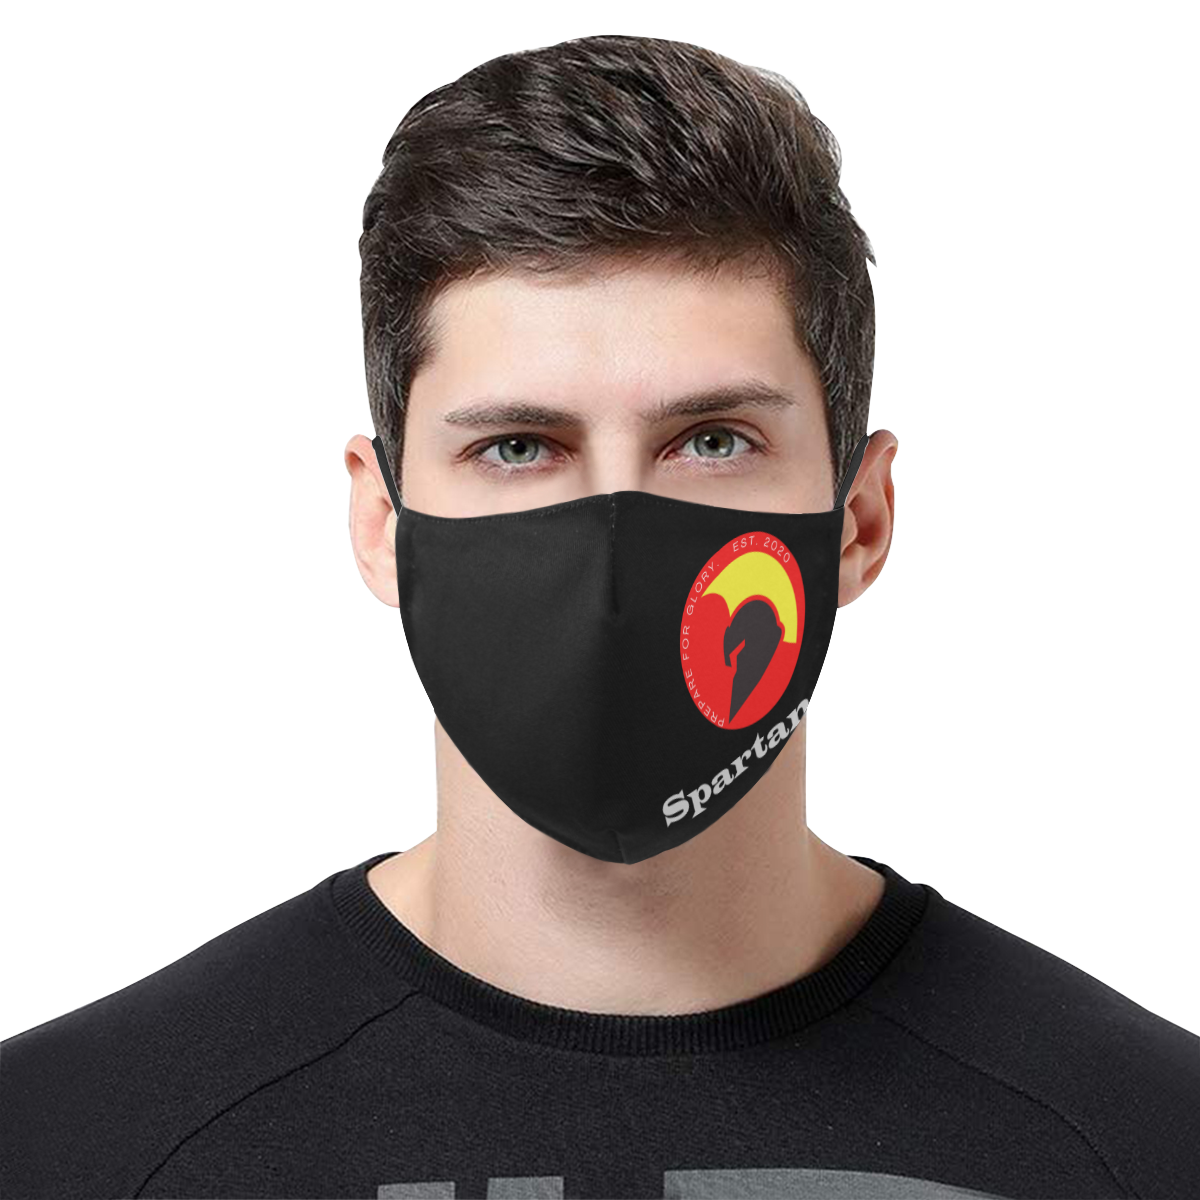 spartan mask_black 3 3D Mouth Mask with Drawstring (Pack of 3) (Model M04)